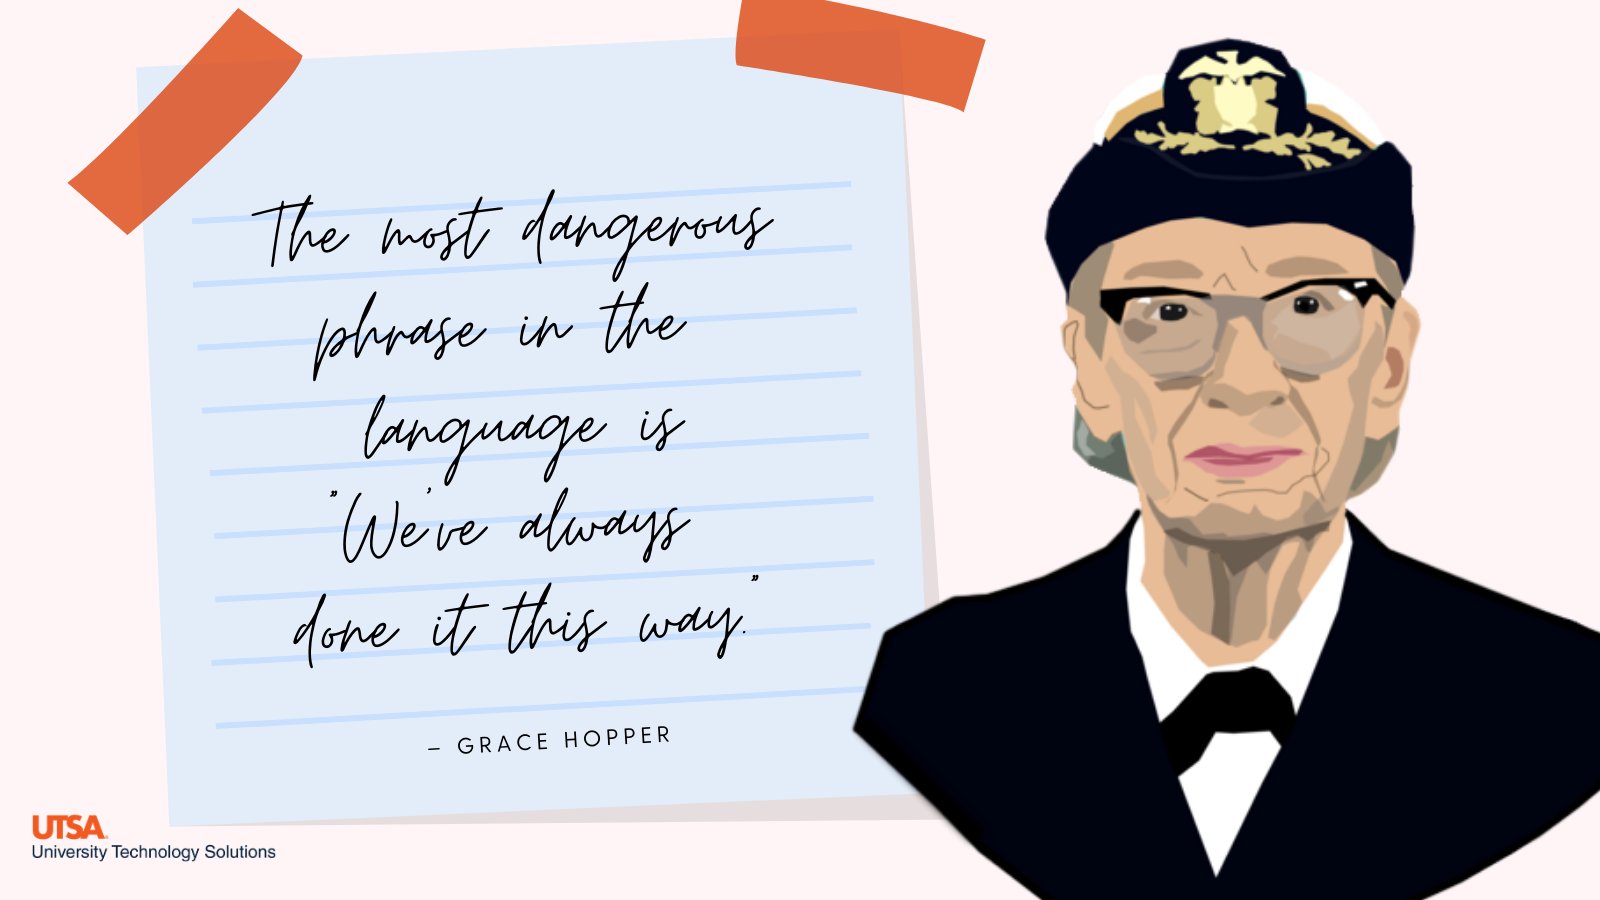 Utsa Technology Solutions Today We Celebrate The Social Economic Cultural And Political Achievements Of Women Around The World Grace Hopper Created The First Computer Language Complier Cheers To The Women